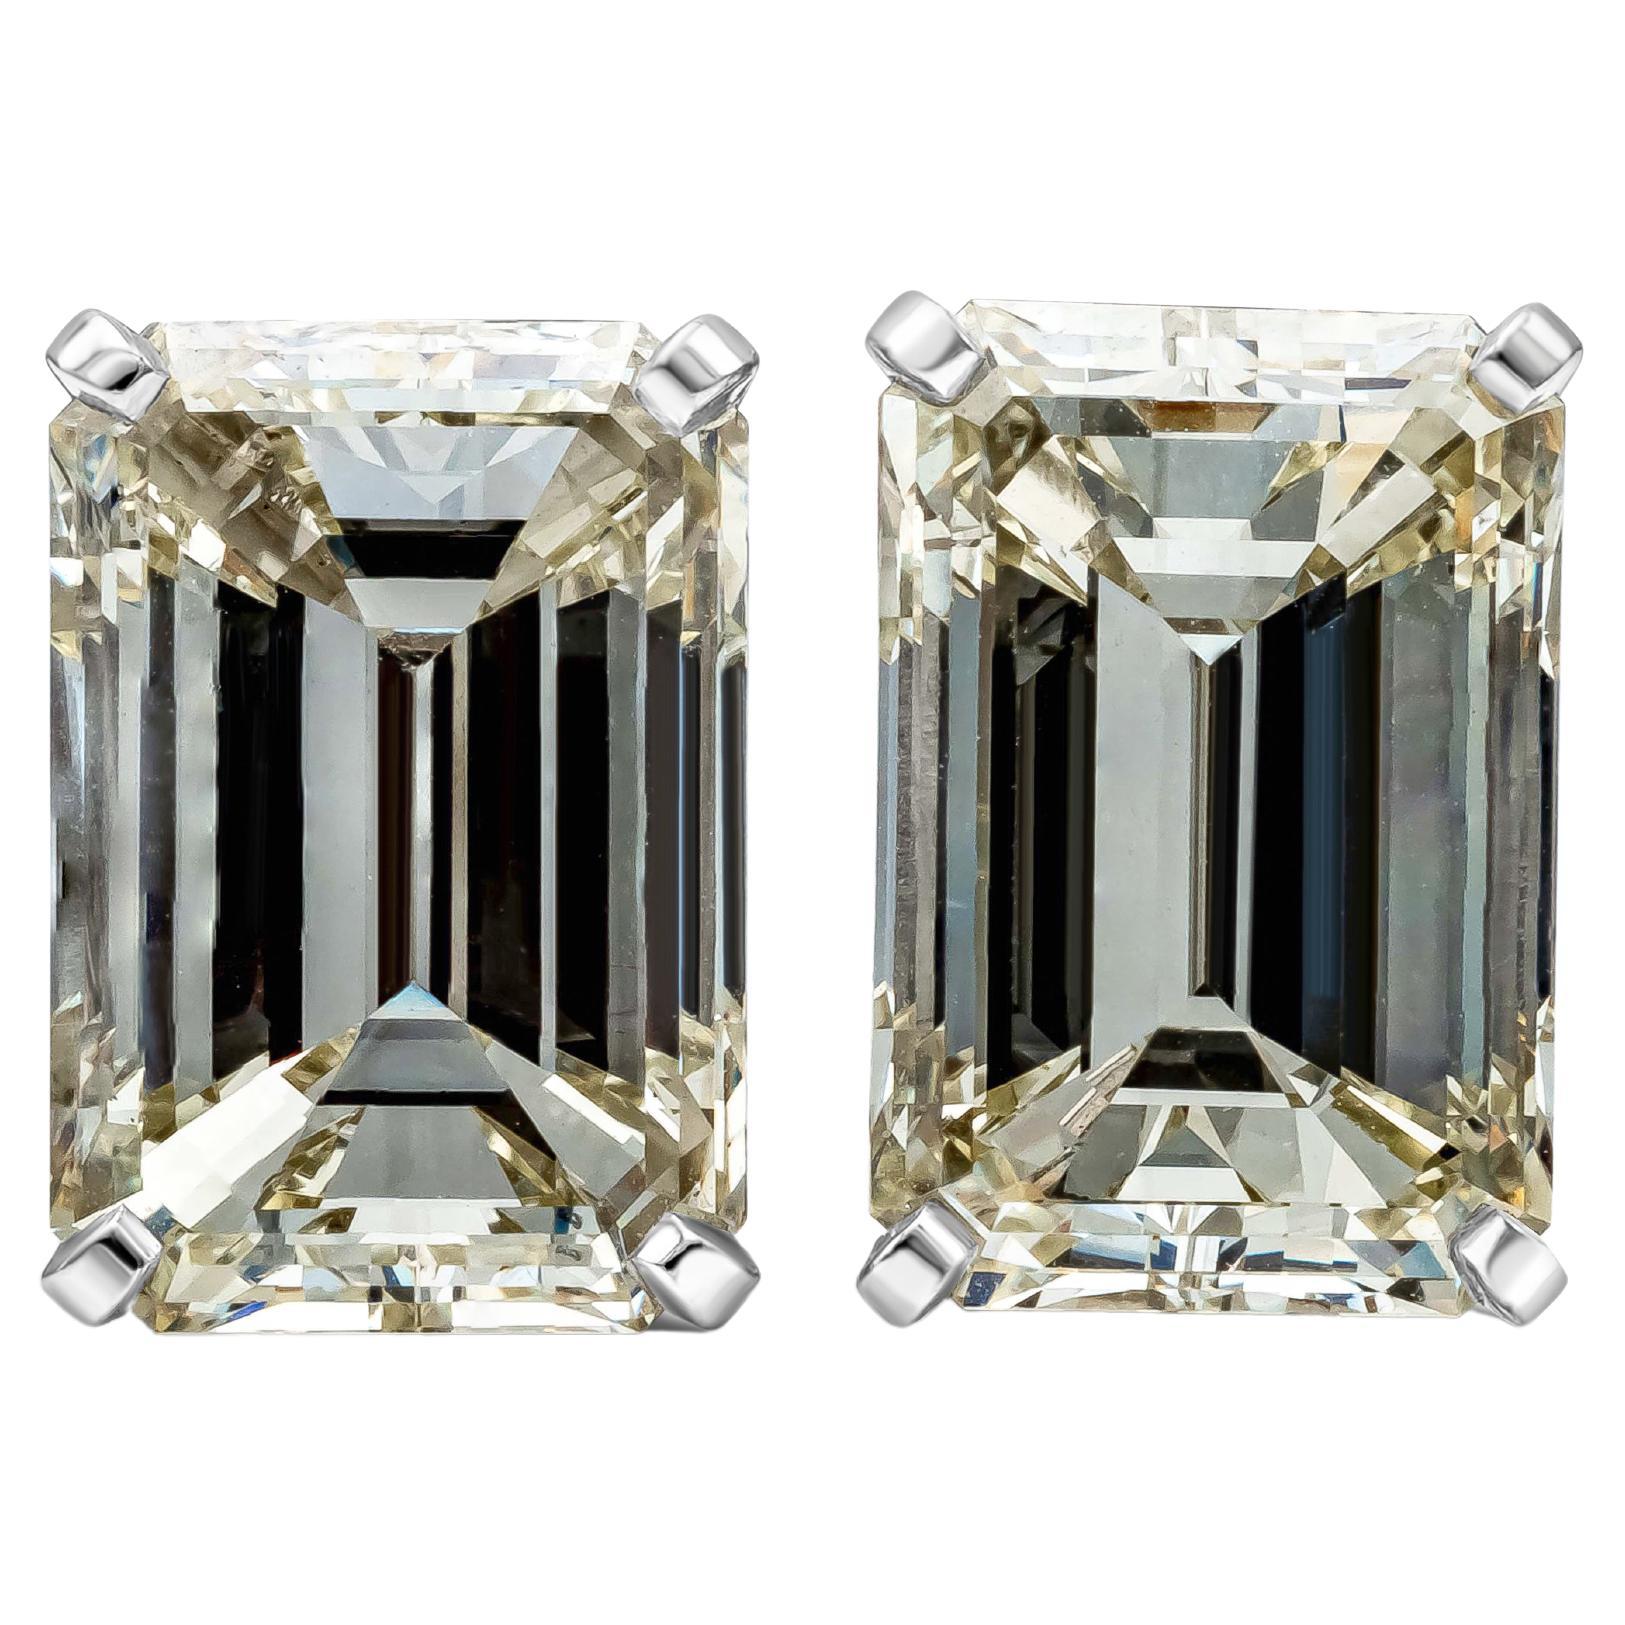 These earrings feature 2 GIA Certified emerald-cut diamonds weighing 7.01 carat and 7.21 carat. The diamonds are GIA certified, K Color and VVS1-VVS2 in Clarity. Hand-crafted in Platinum, with an omega/post mechanism.

Style available in different